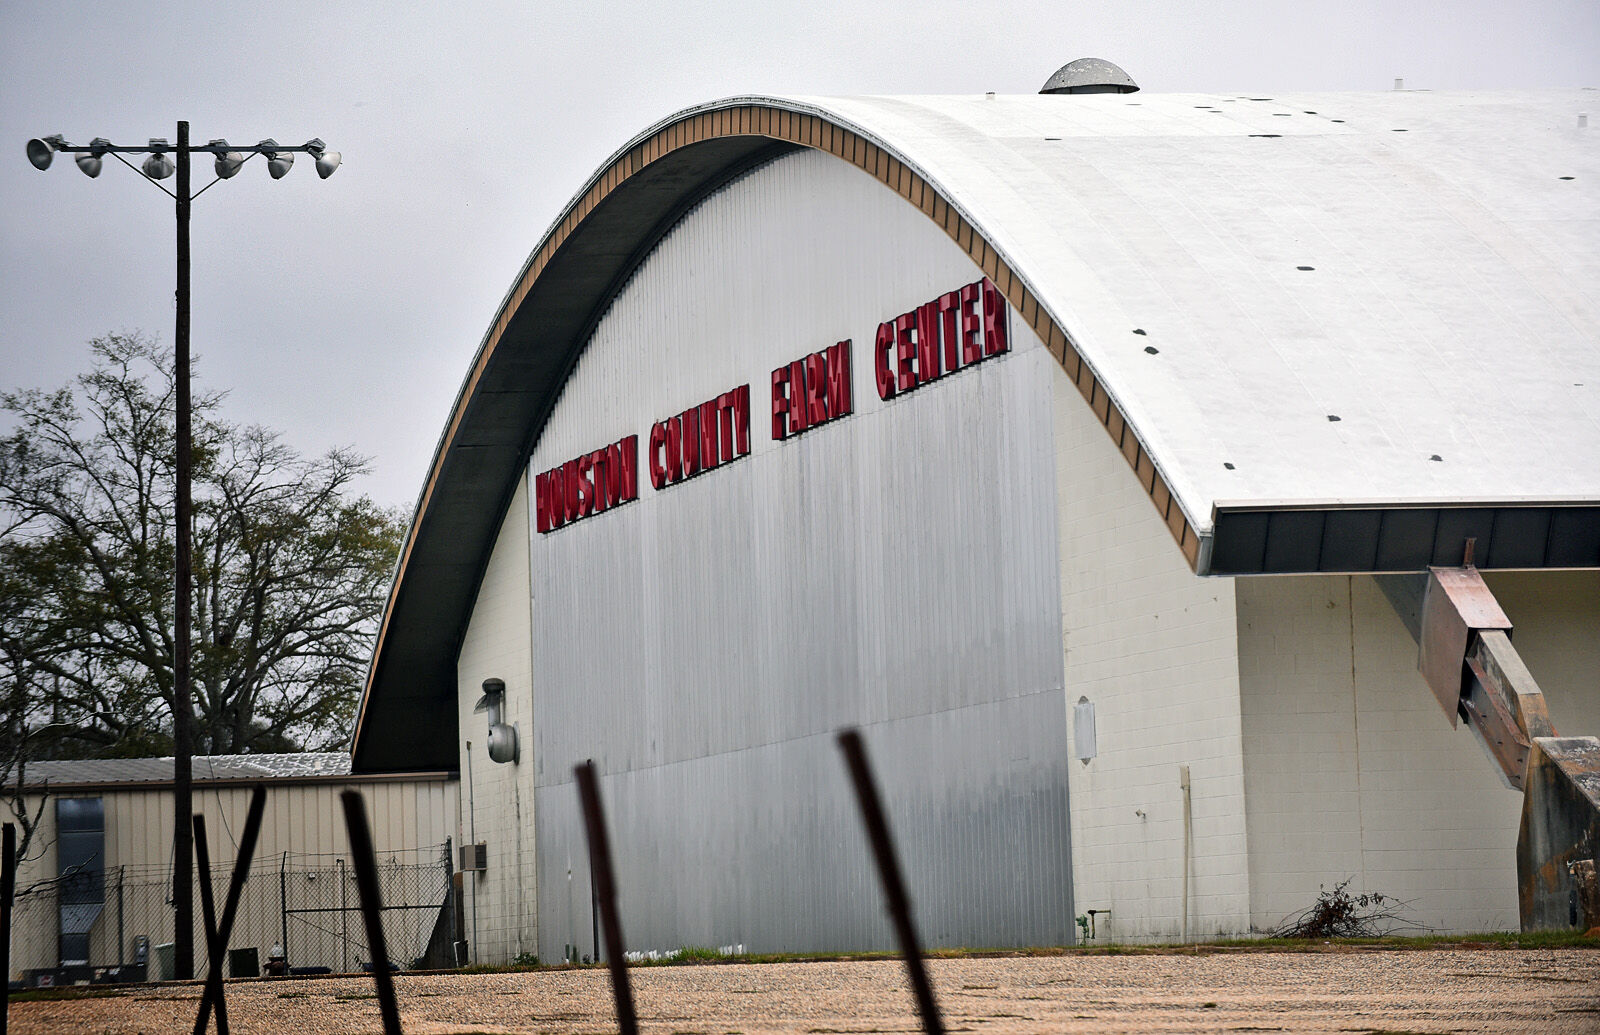 Houston County seeks delay on farm center sale to Dothan pic